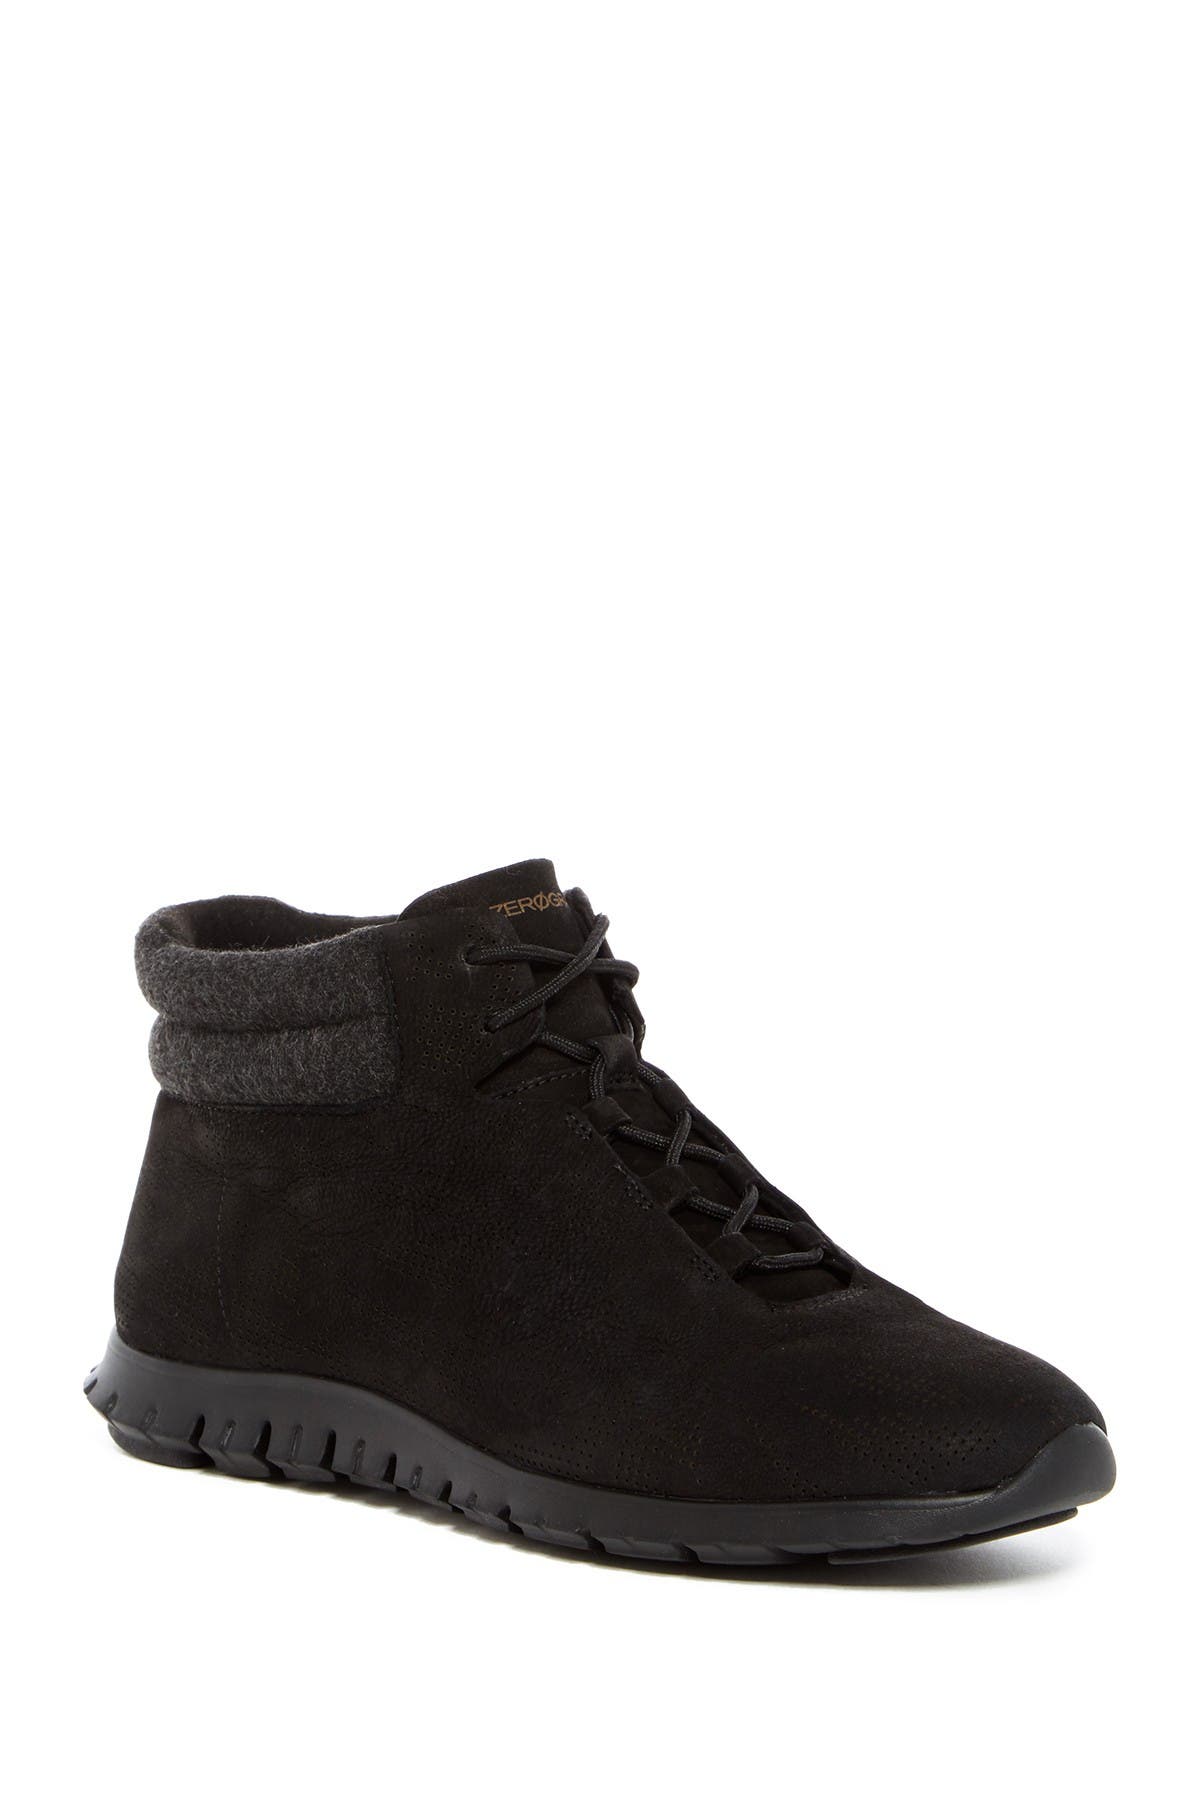 cole haan zerogrand perforated trainer